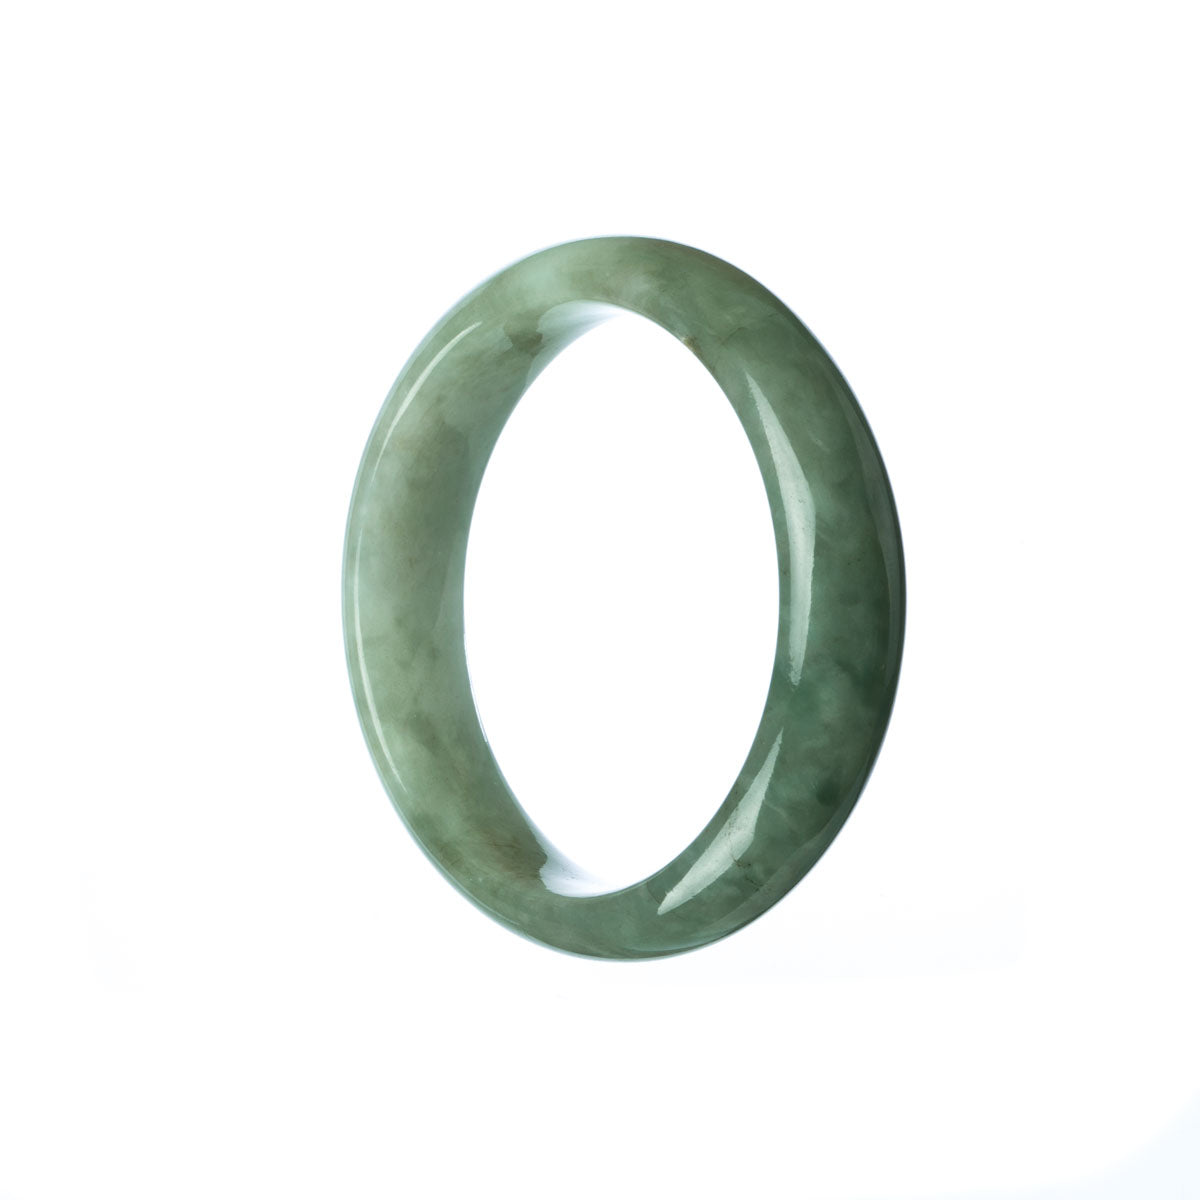 A delicate green jadeite bracelet designed for children featuring a half moon charm.